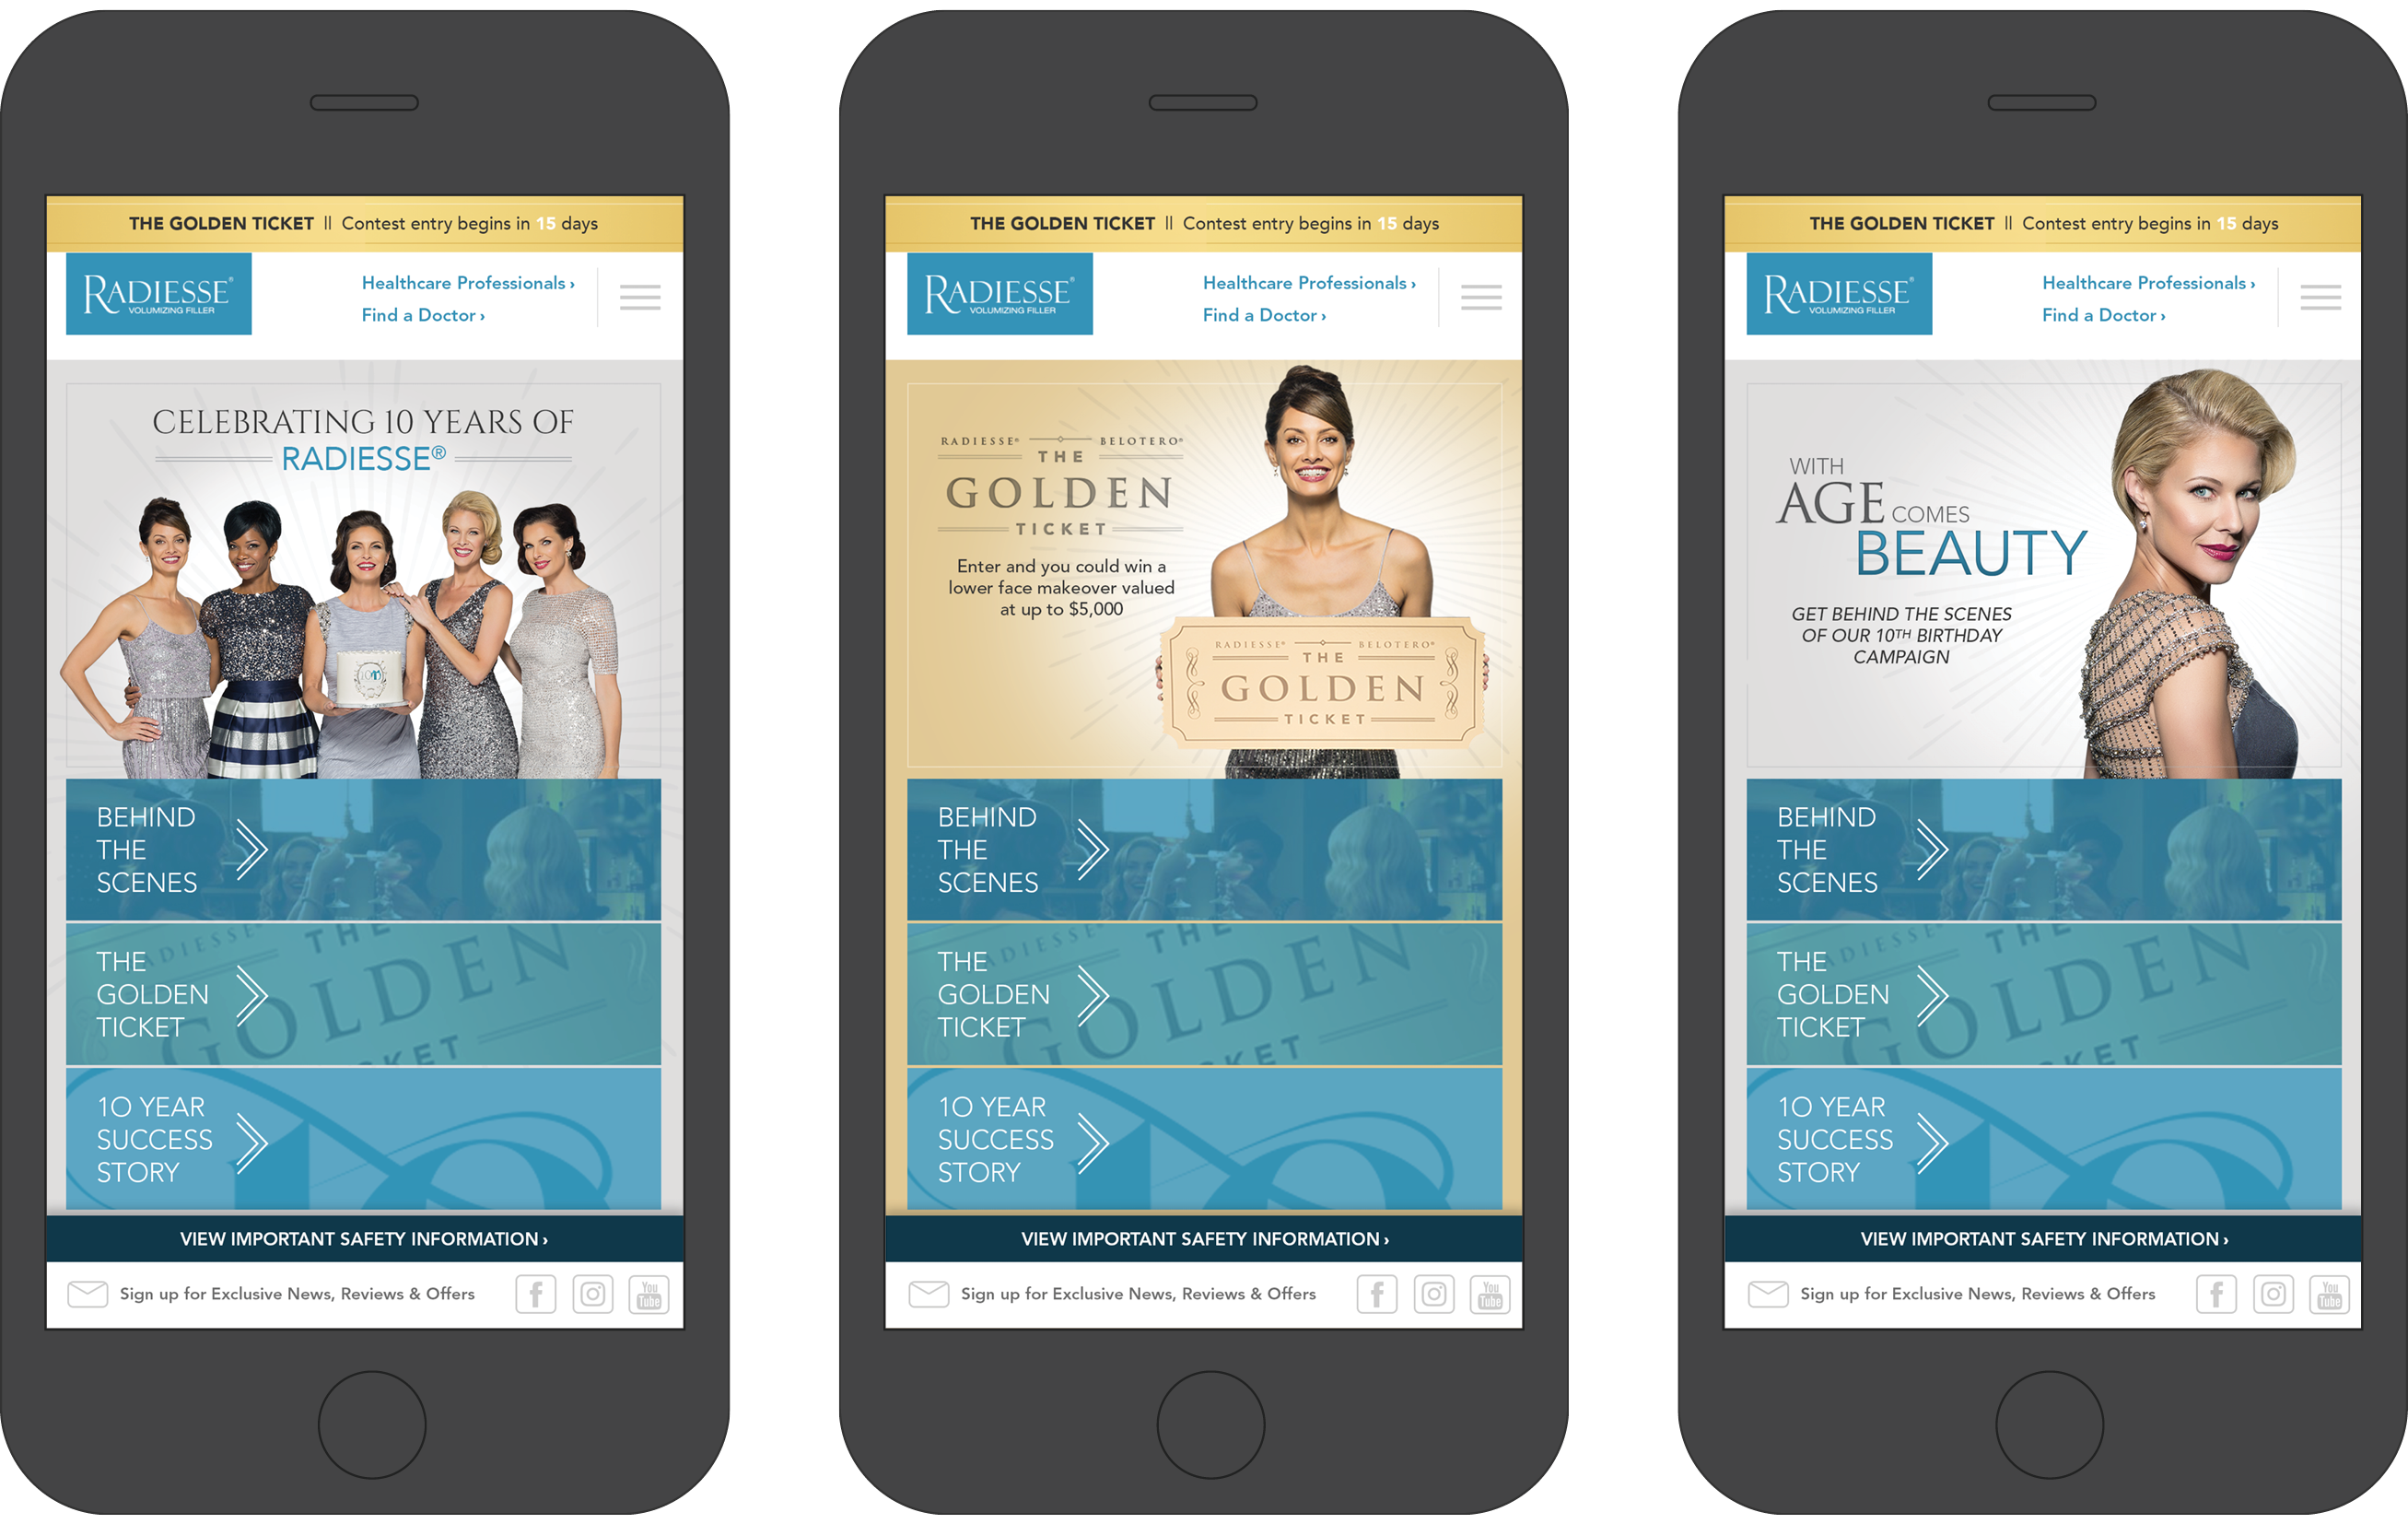 With Age Comes Beauty mobile website mock-up